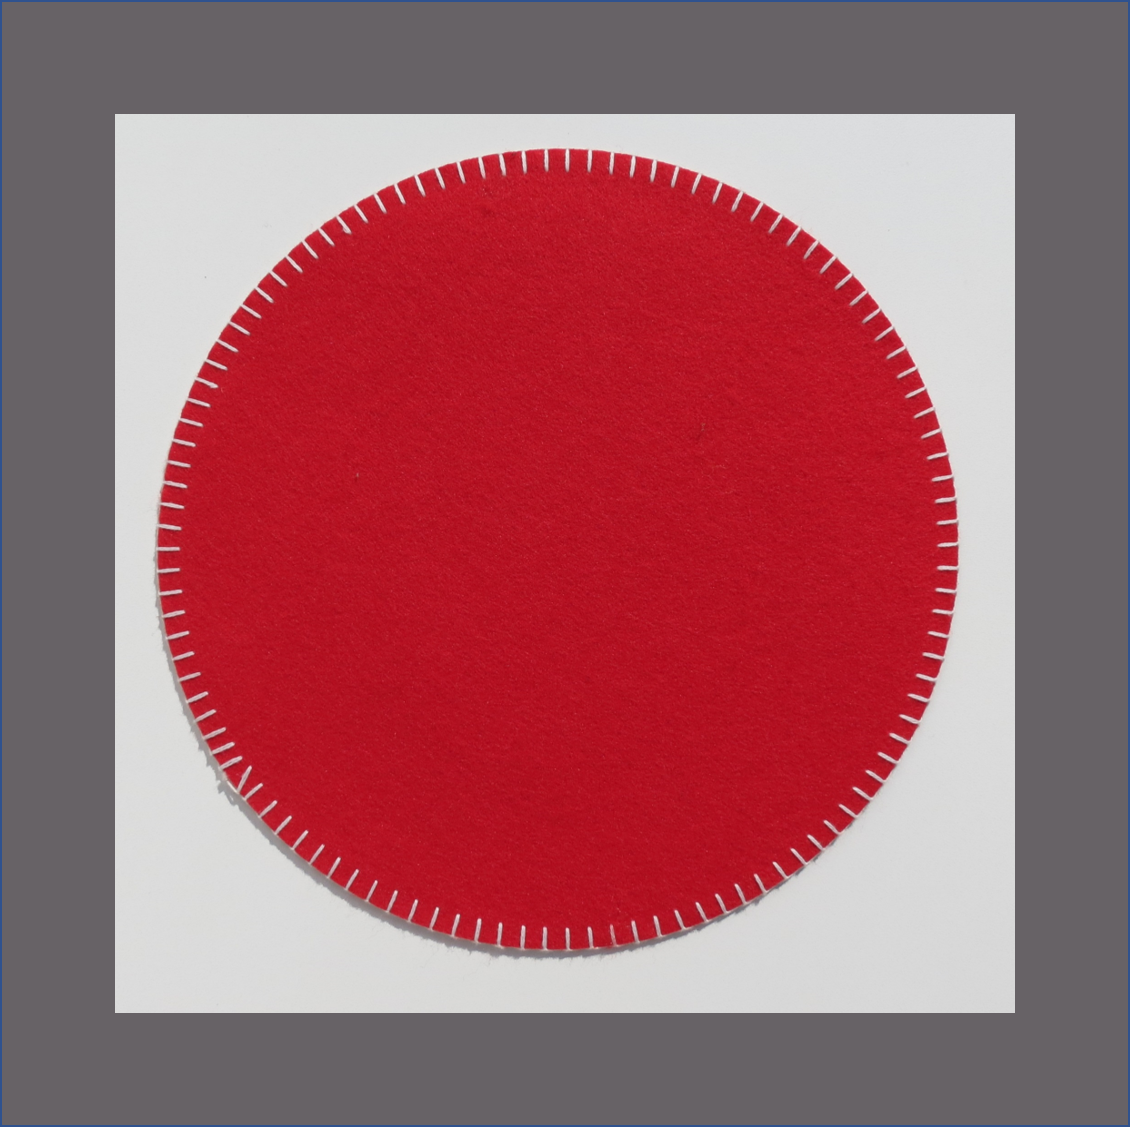 red-round-placemat-with-white-stitch-felt